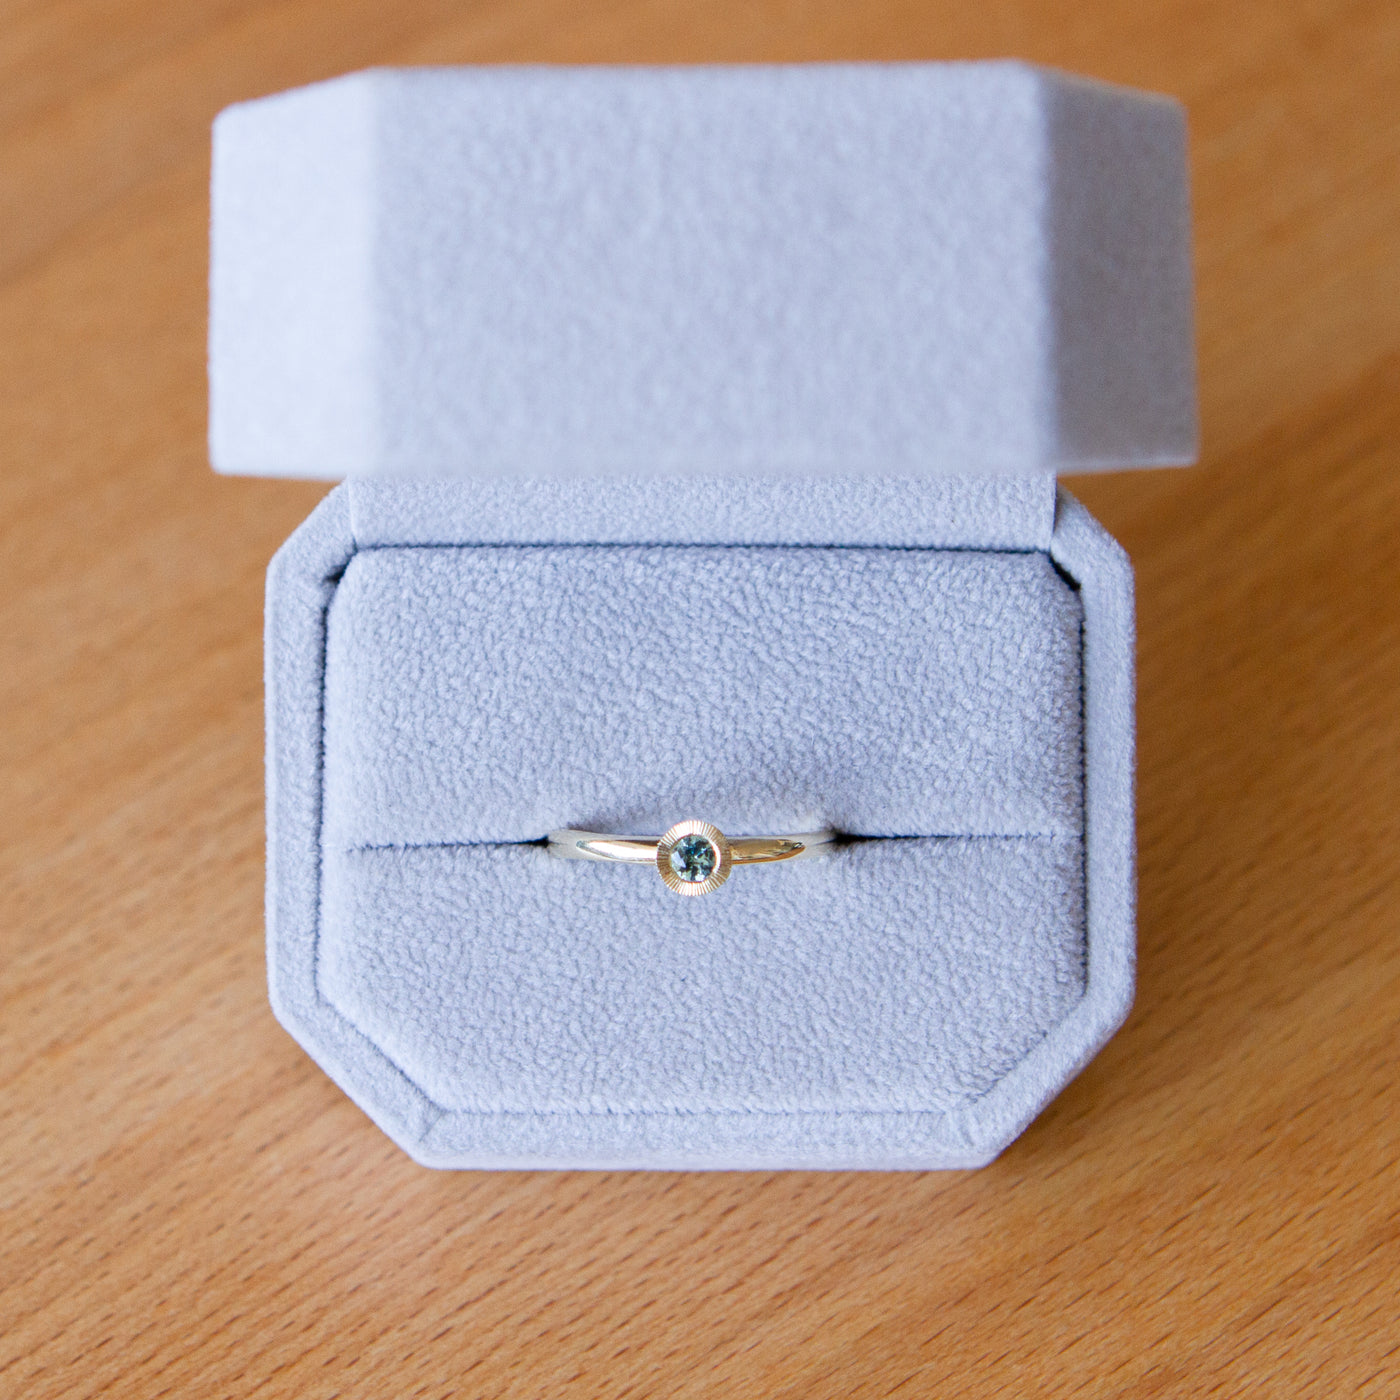 Teal Montana Sapphire Large Aurora Stacking Ring in Yellow Gold packaged in a gray ring box